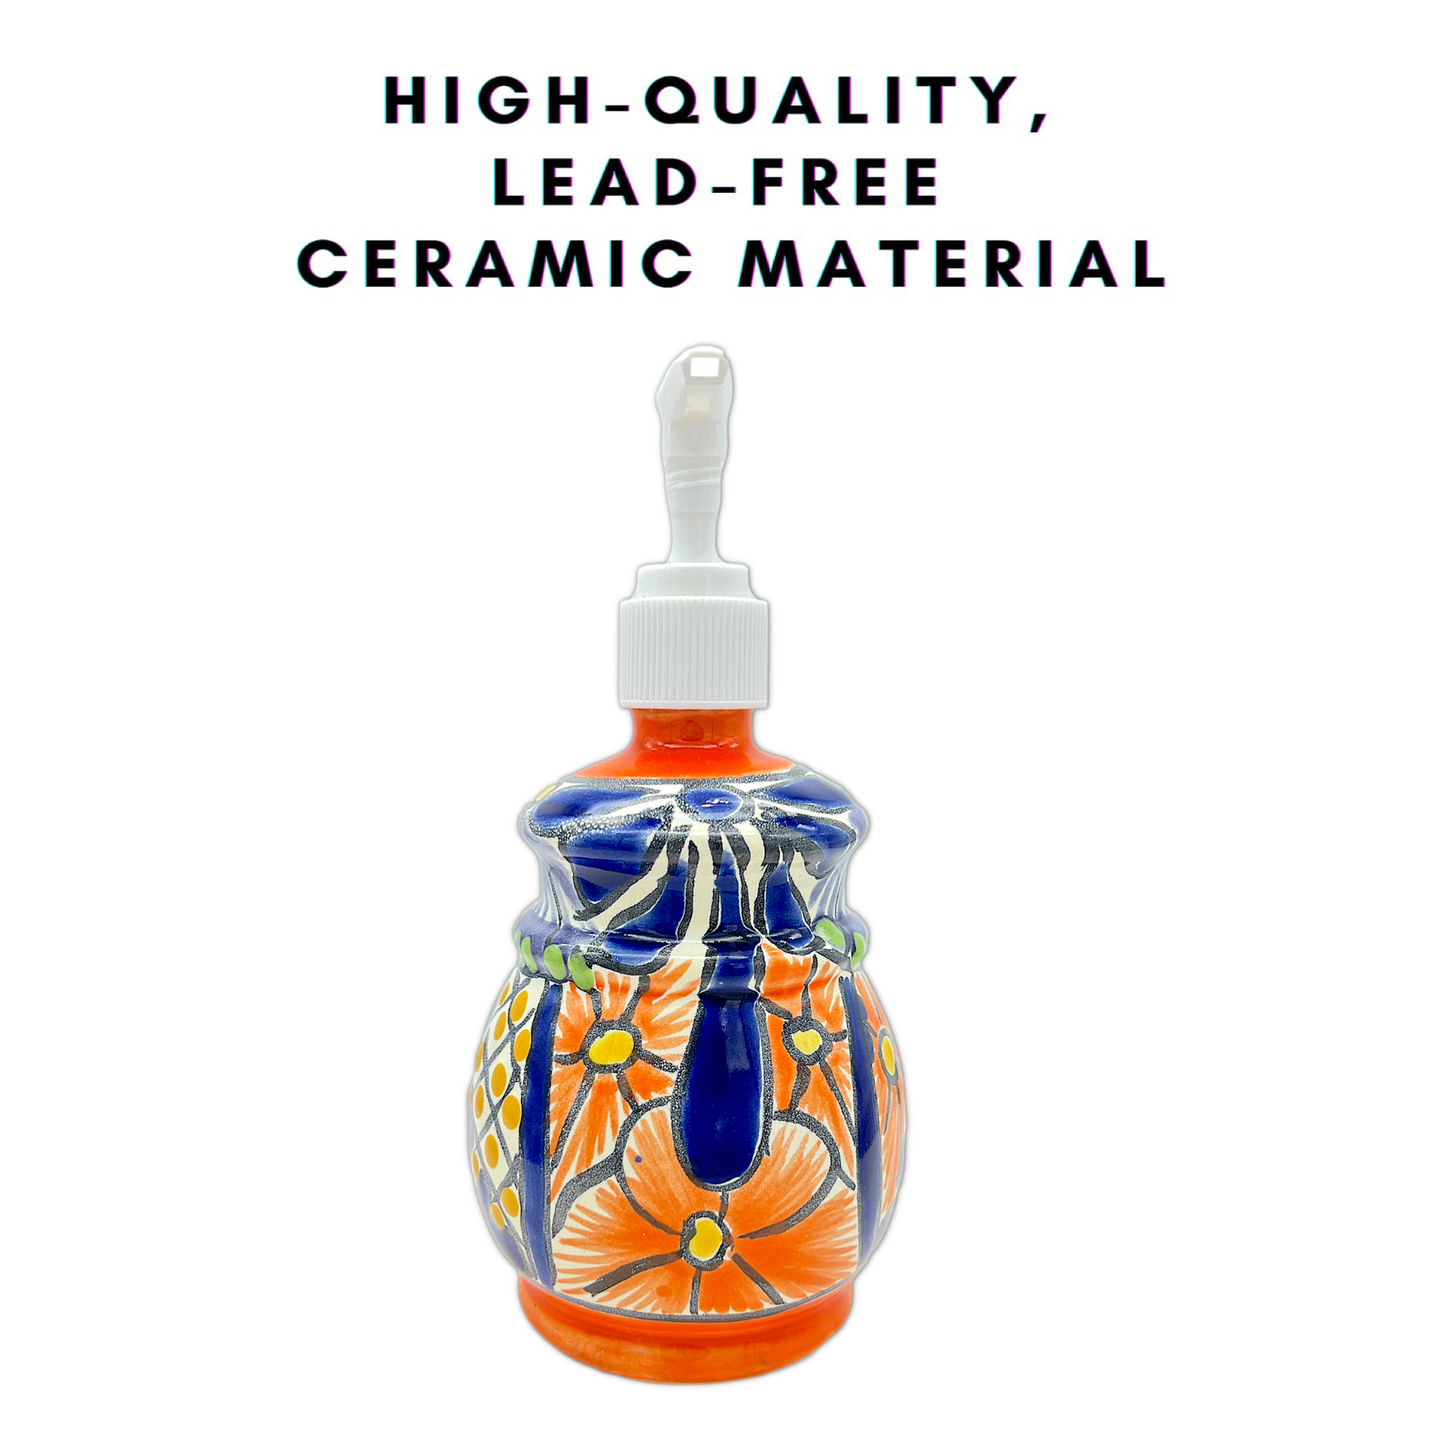 high quality lead free ceramic material A multicolored, bell design, hand-painted Talavera ceramic soap dispenser sourced from skilled Mexican artisans.